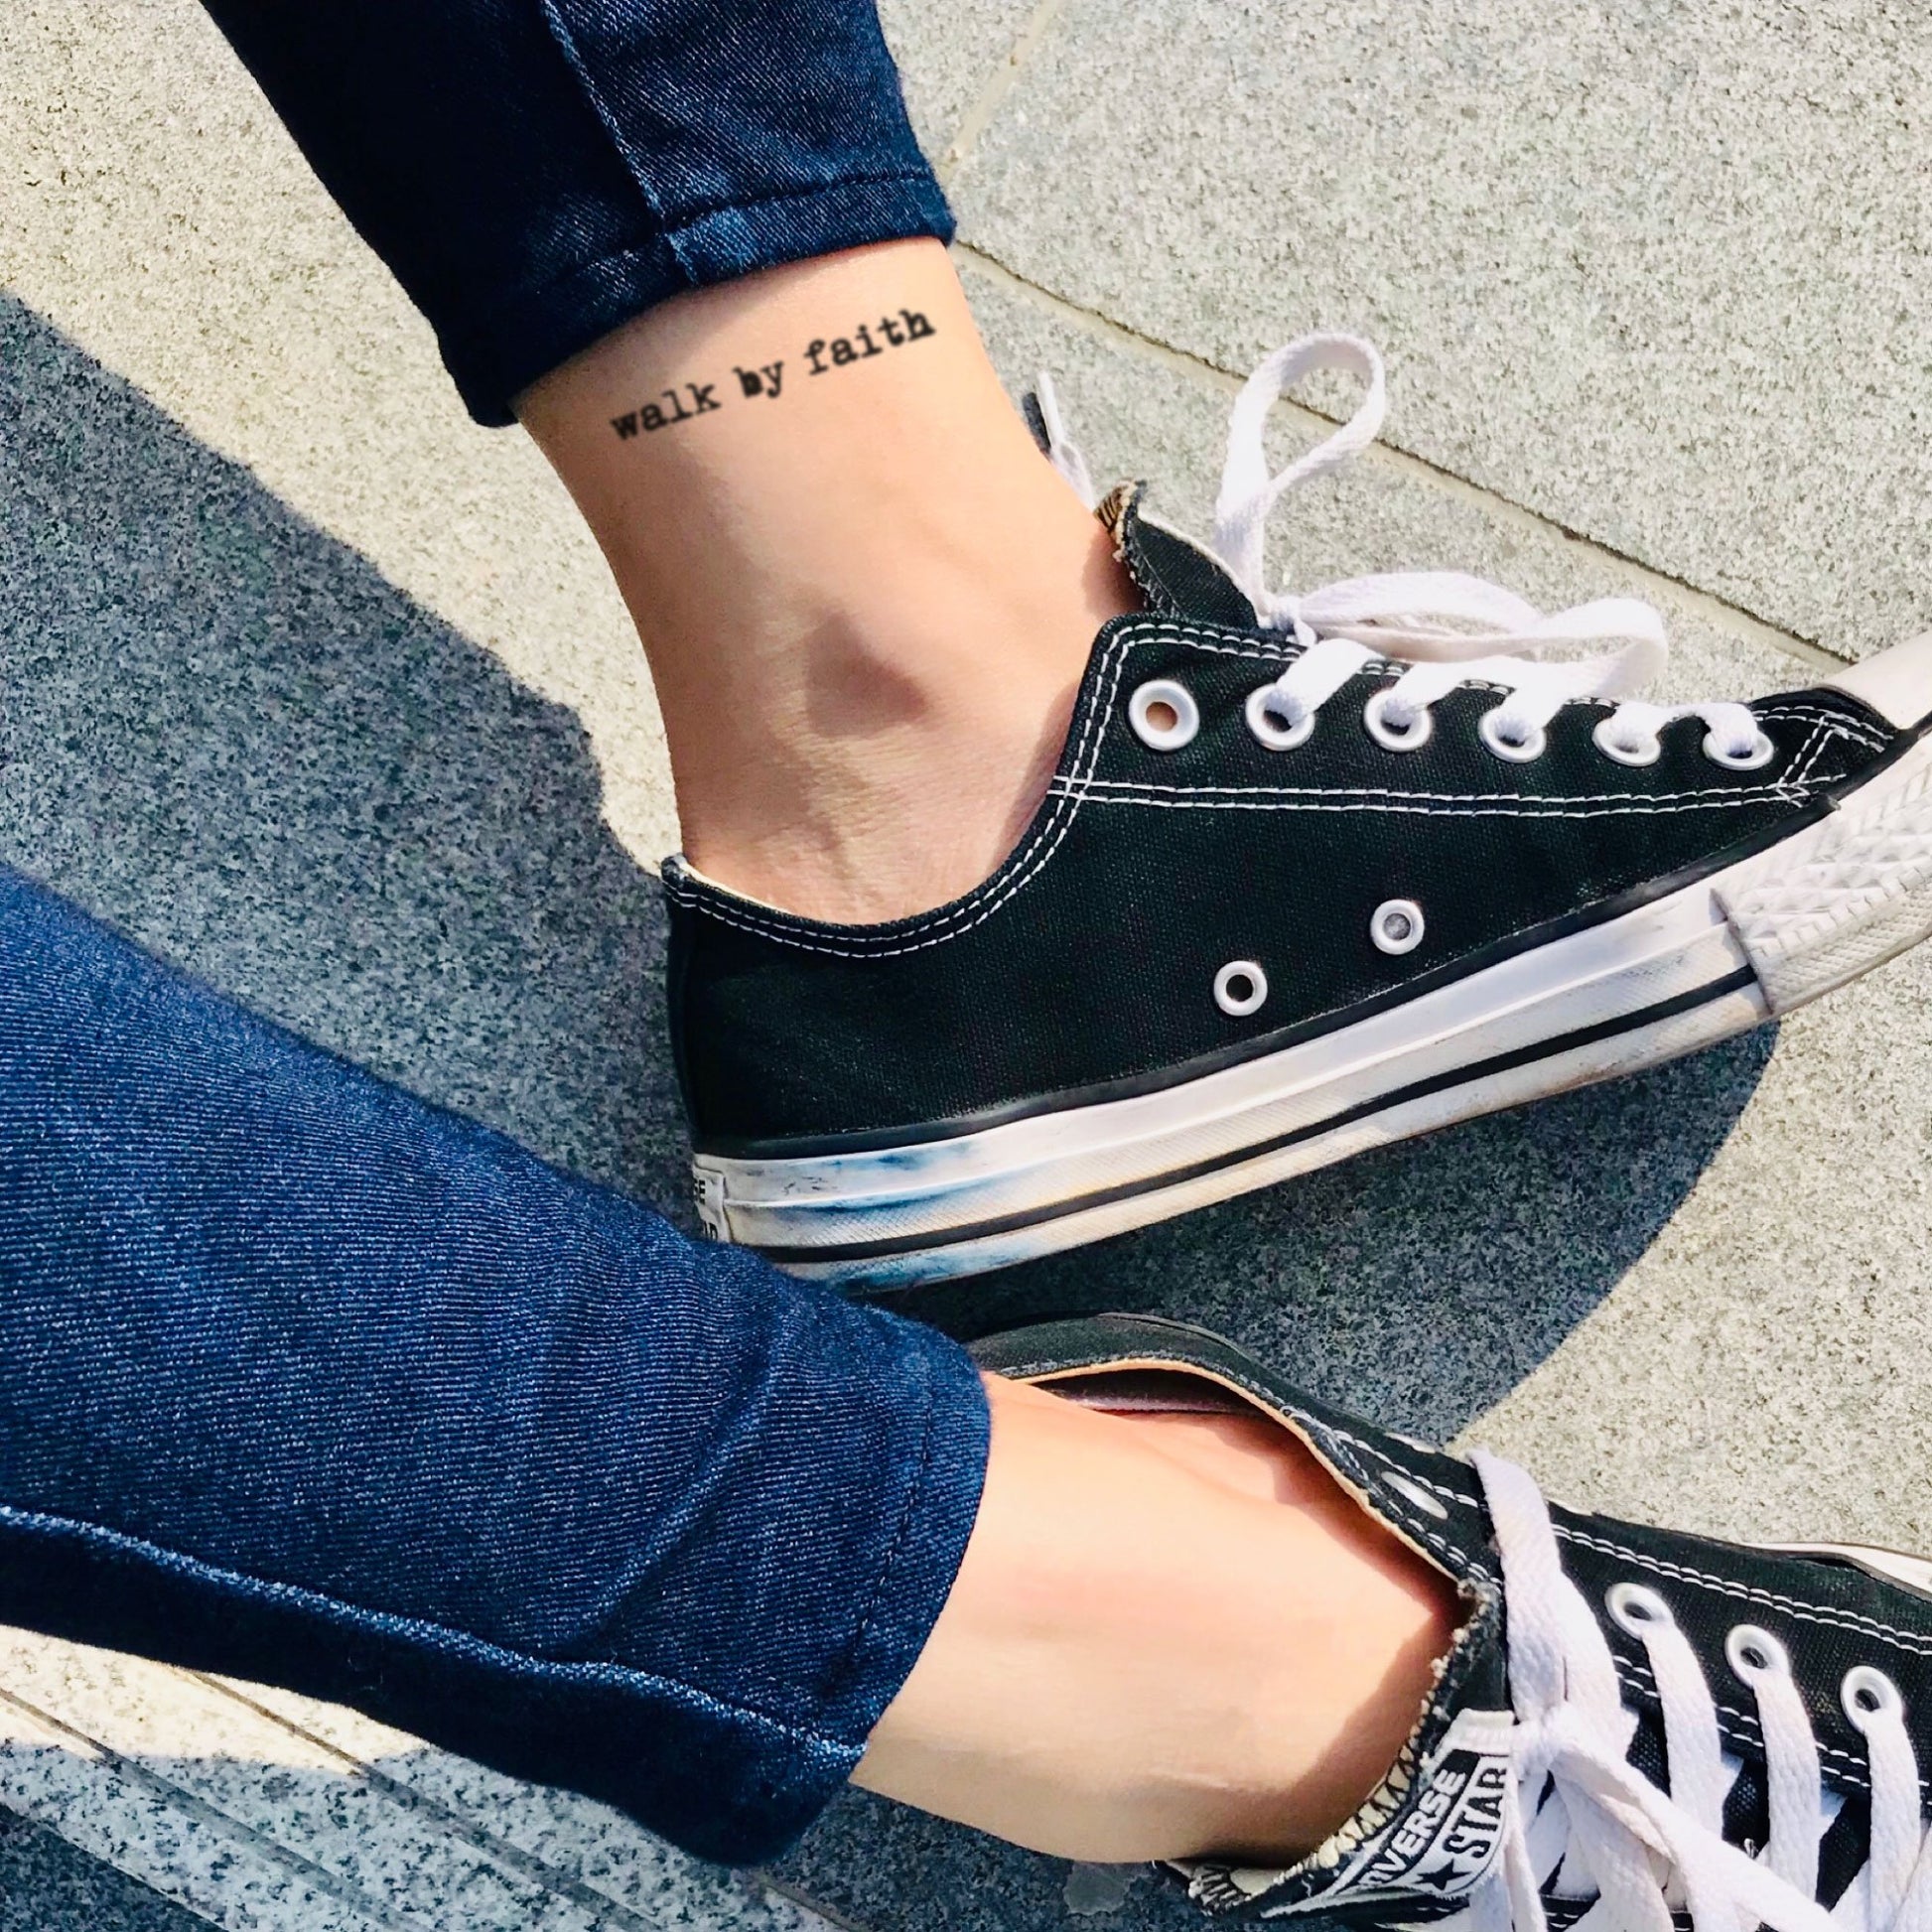 fake small walk by faith foot leg lettering temporary tattoo sticker design idea on ankle